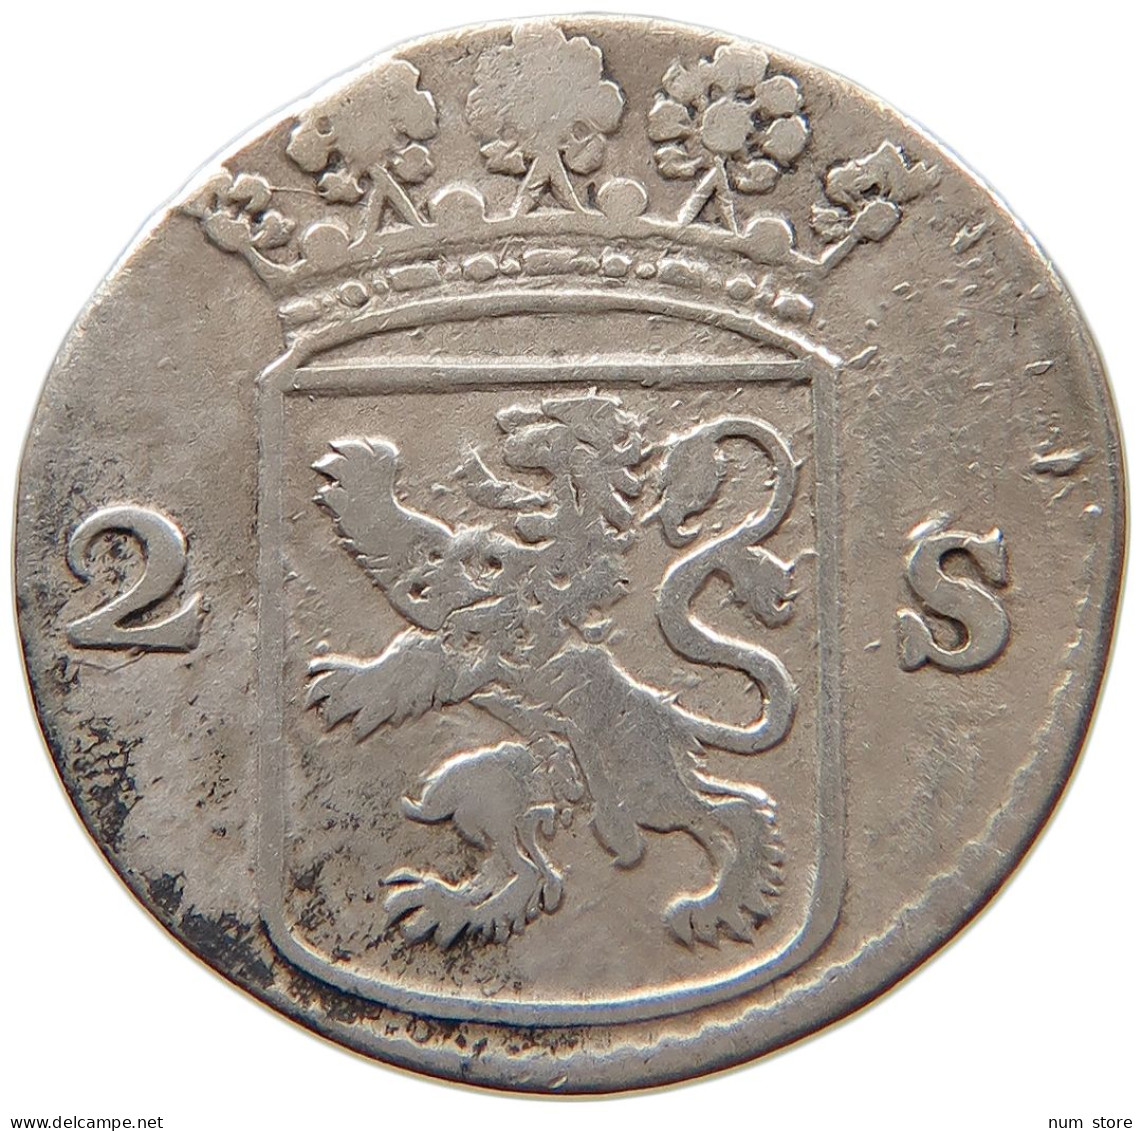 NETHERLANDS 2 STUIVERS 1750 HOLLAND #s101 0179 - Provincial Coinage